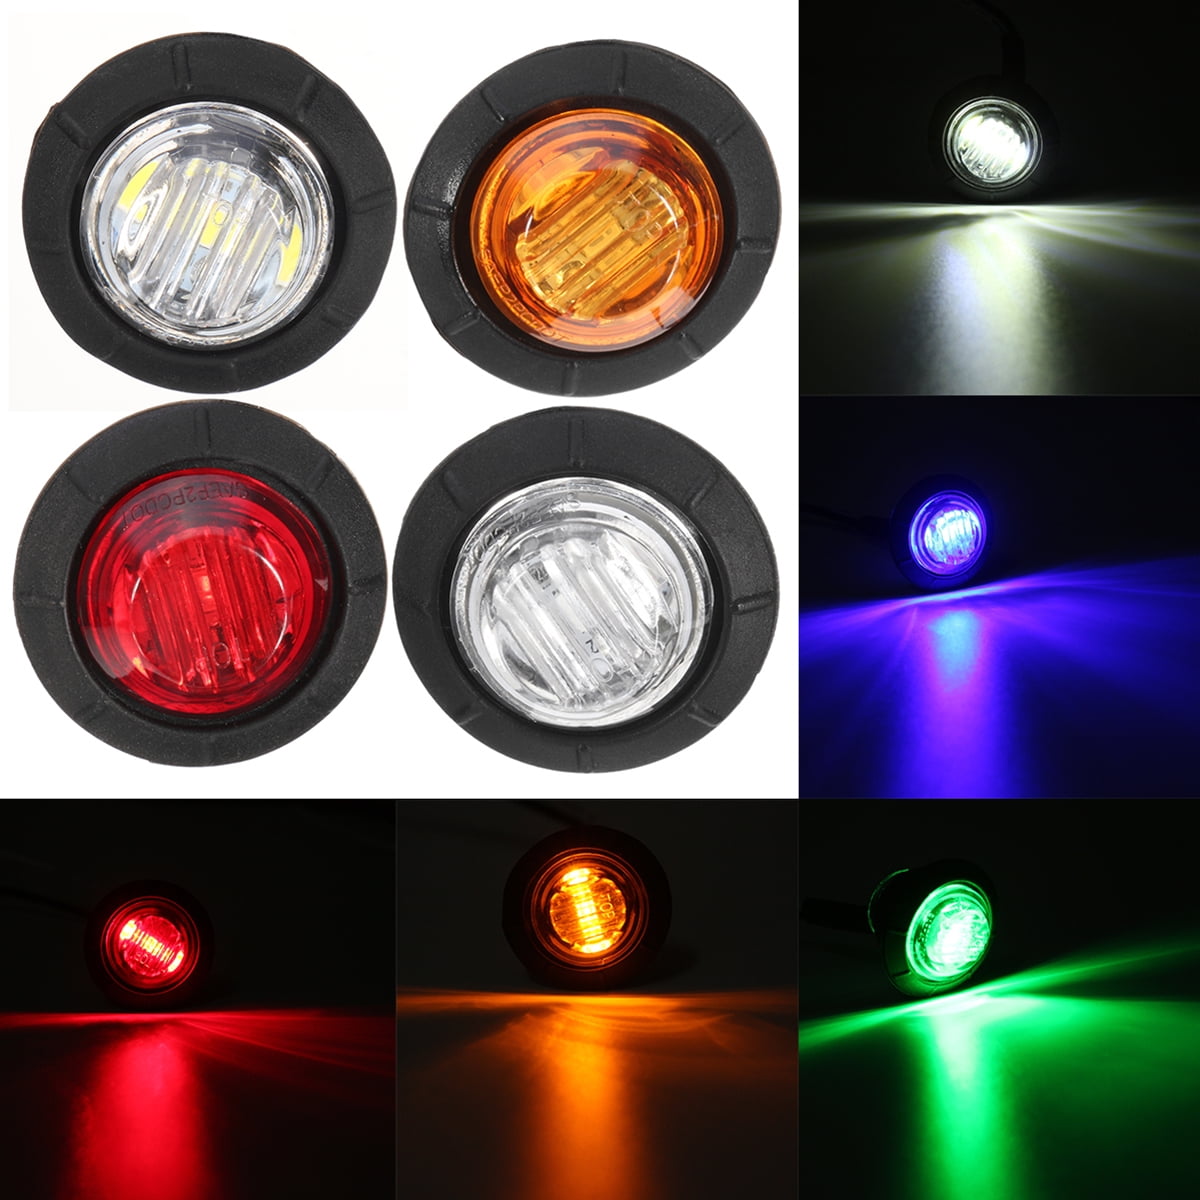 10 x 12V/24V RED SMALL ROUND LED BUTTON REAR MARKER LAMPS/LIGHTS UNIVERSAL TRUCK